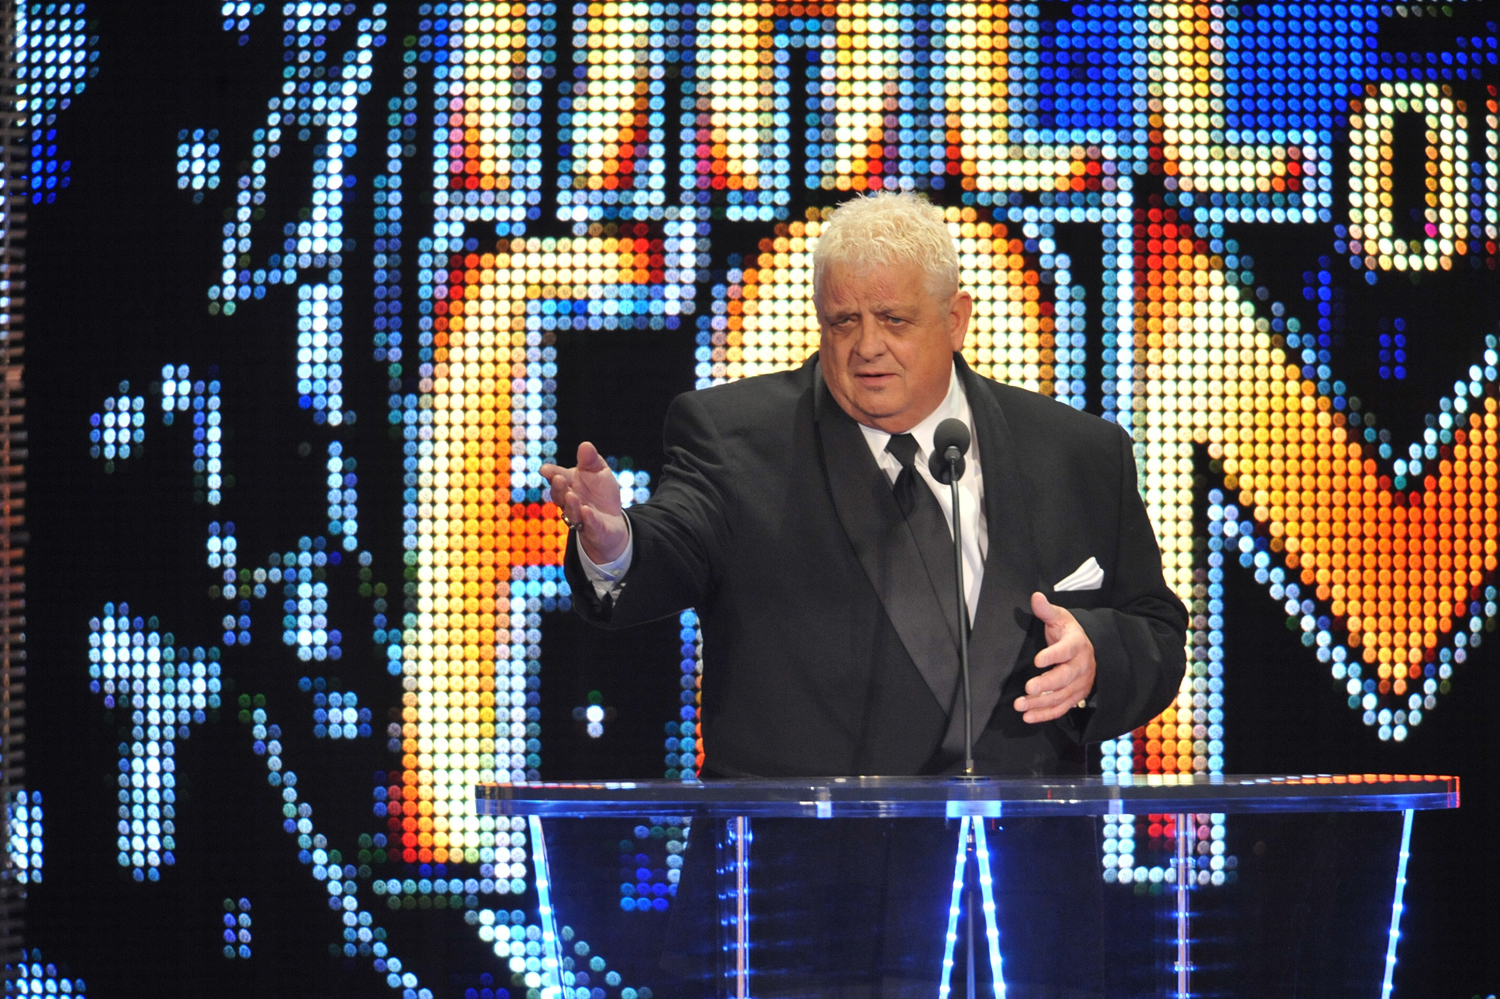 Dusty Rhodes attends the 2011 WWE Hall of Fame induction ceremony at the Philips Arena in Atlanta on April 3, 2011 (Moses Robinson —Getty Images)